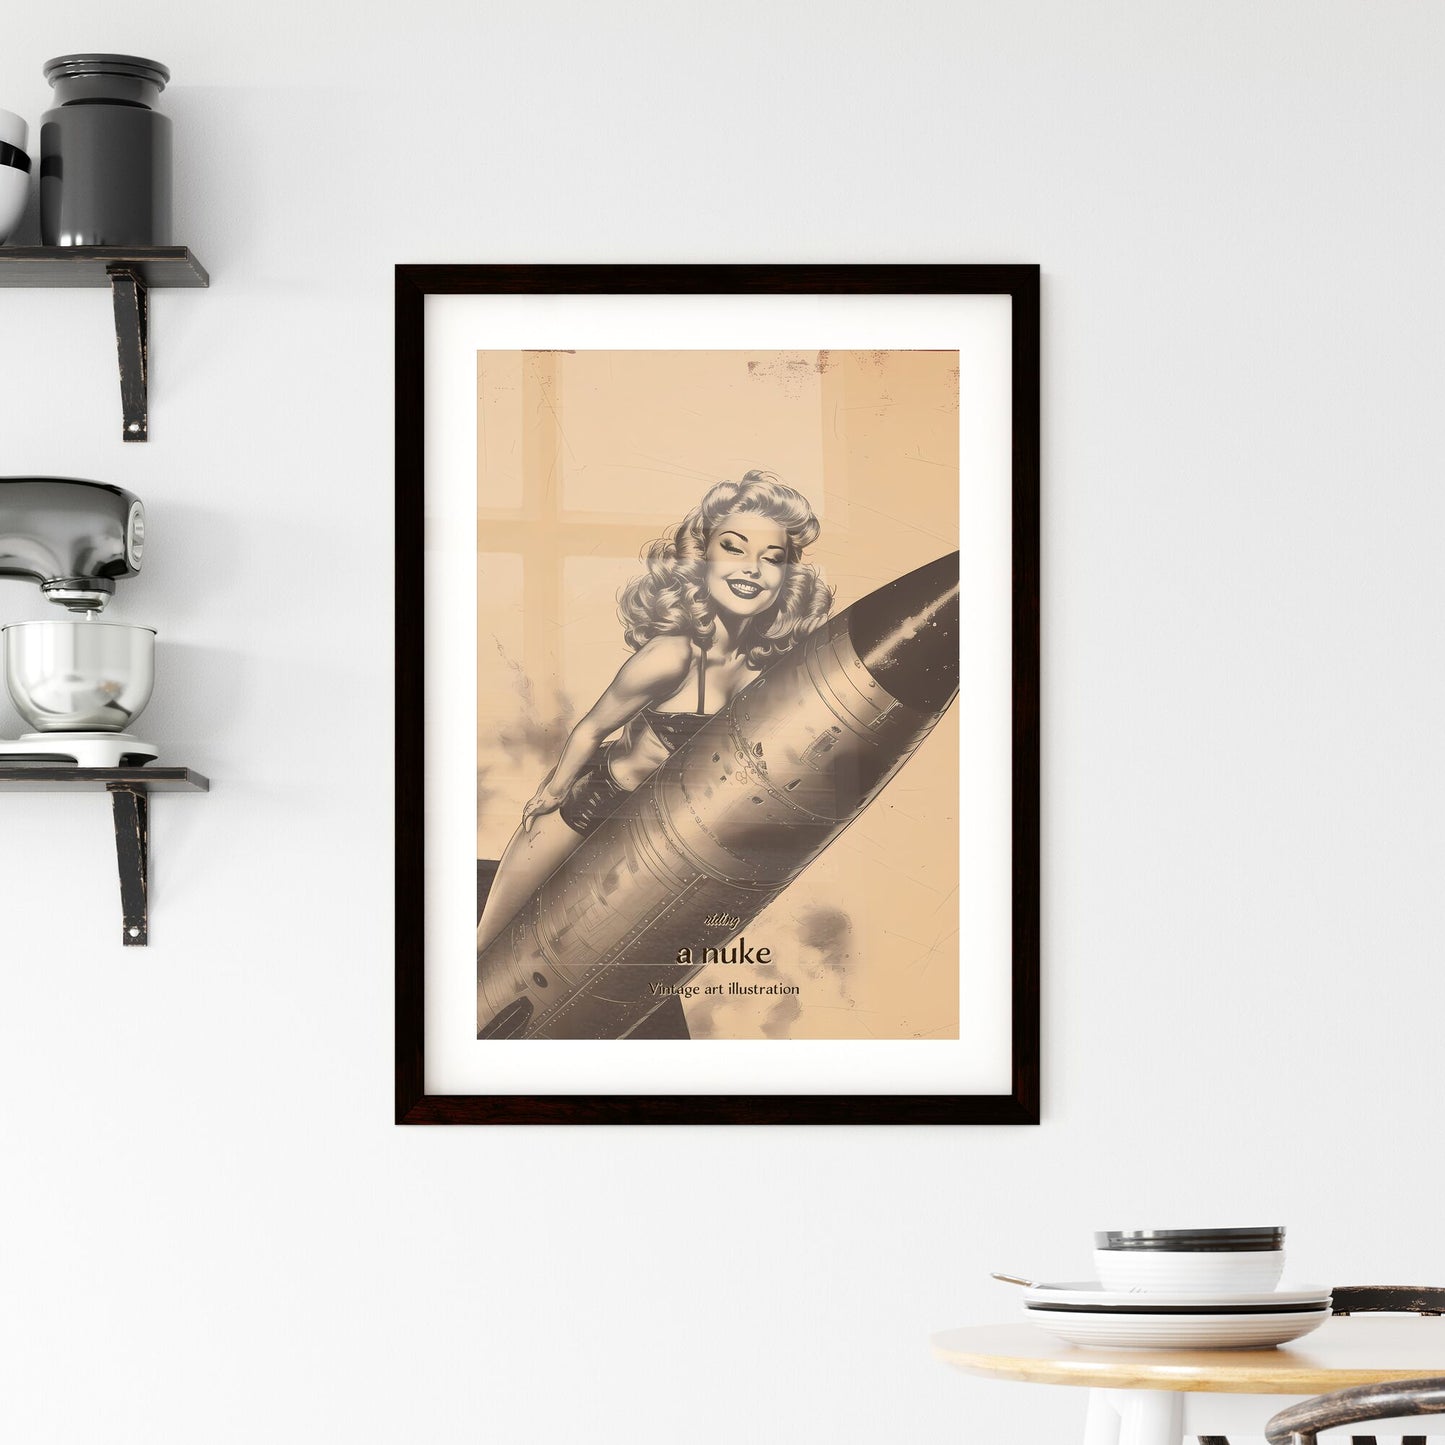 riding, a nuke, Vintage art illustration, A Poster of a woman in garment holding a rocket Default Title